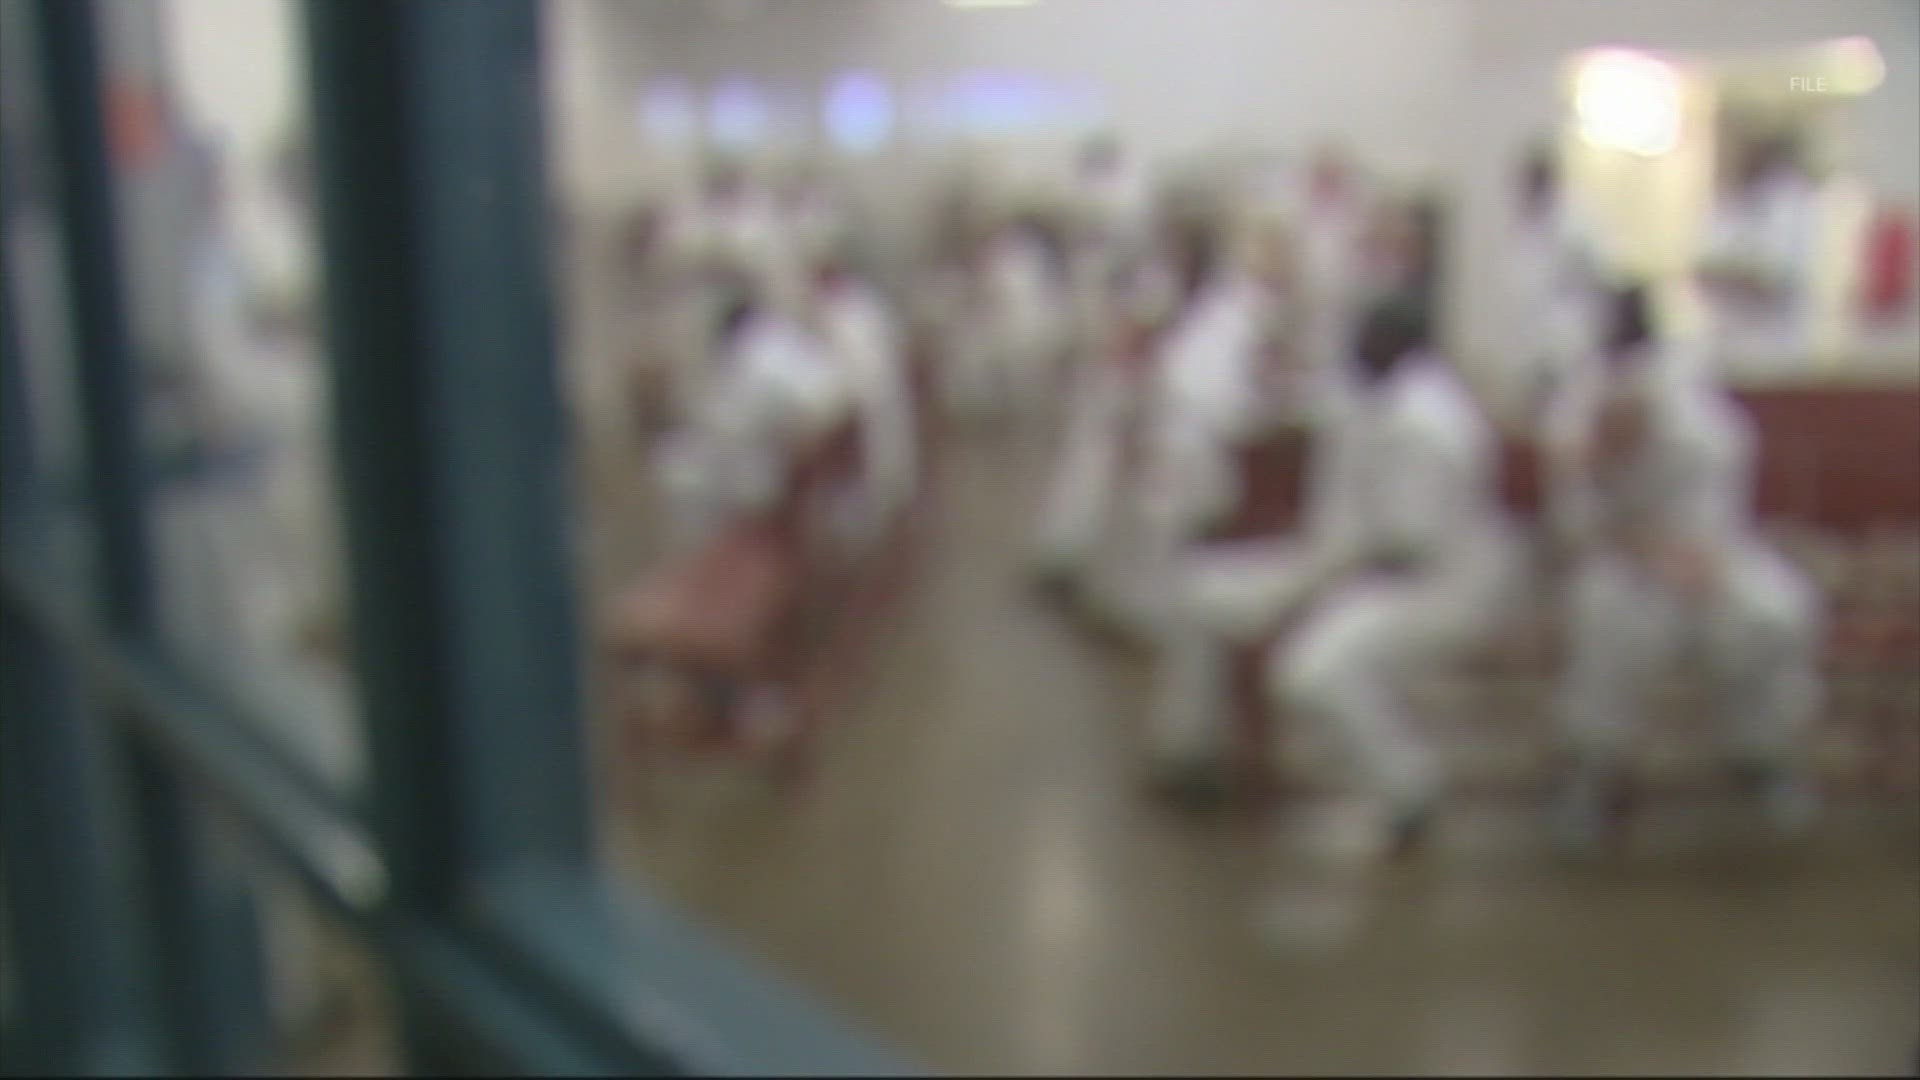 About two-thirds of the state's 100 prisons don't have air conditioning in most living areas.